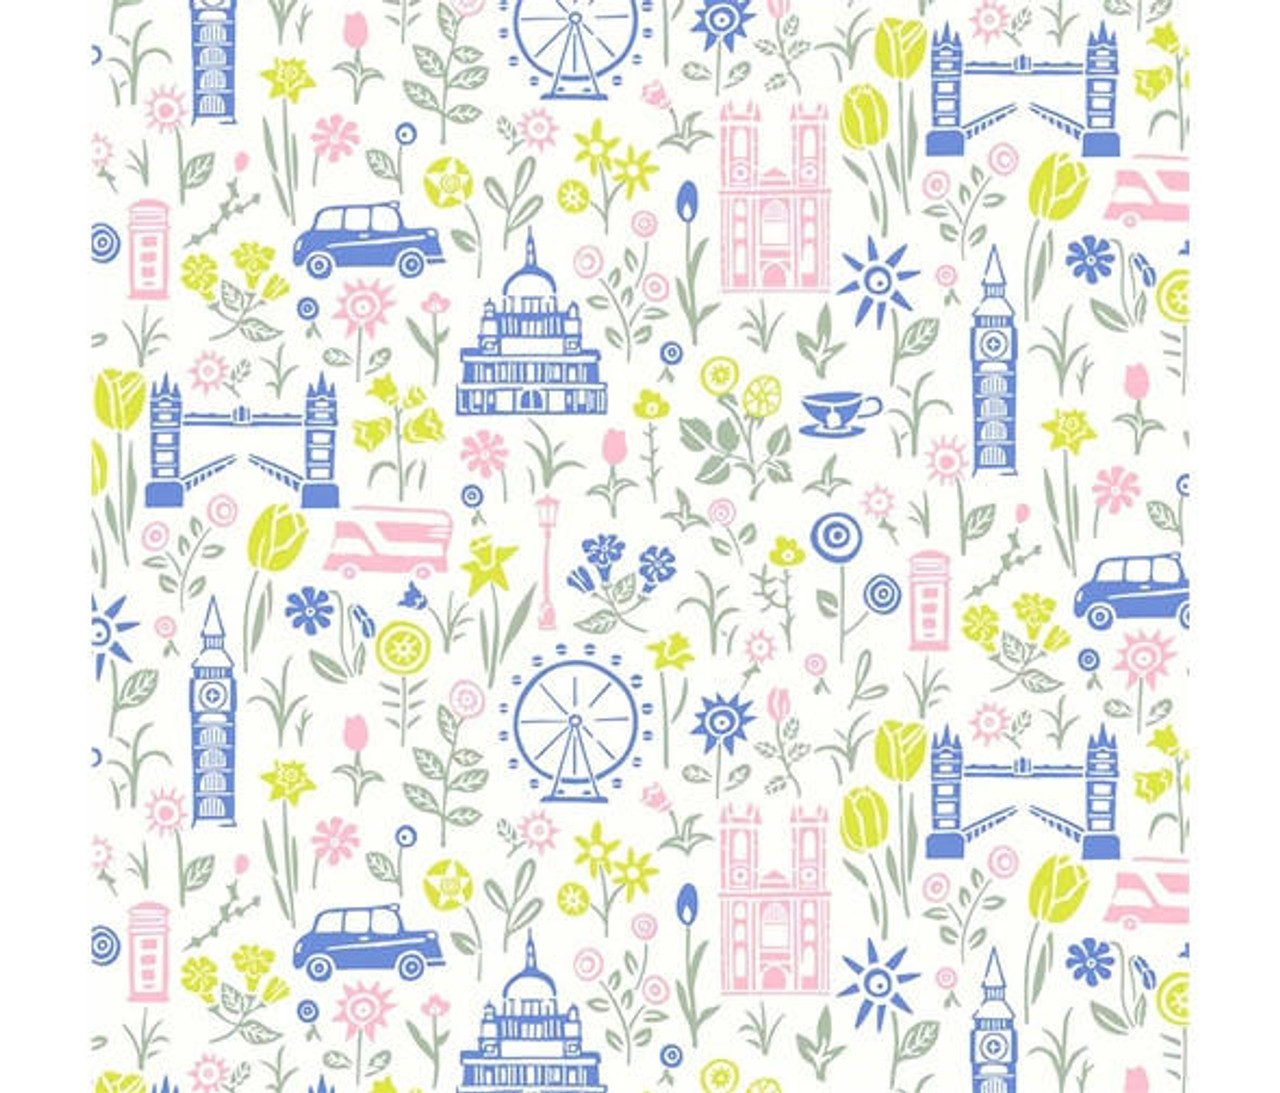 POTTERY BARN KIDS AND PBTEEN UNVEIL EXCLUSIVE COLLECTIONS WITH BRITISH  DESIGN BRAND LIBERTY LONDON FABRICS  Business Wire